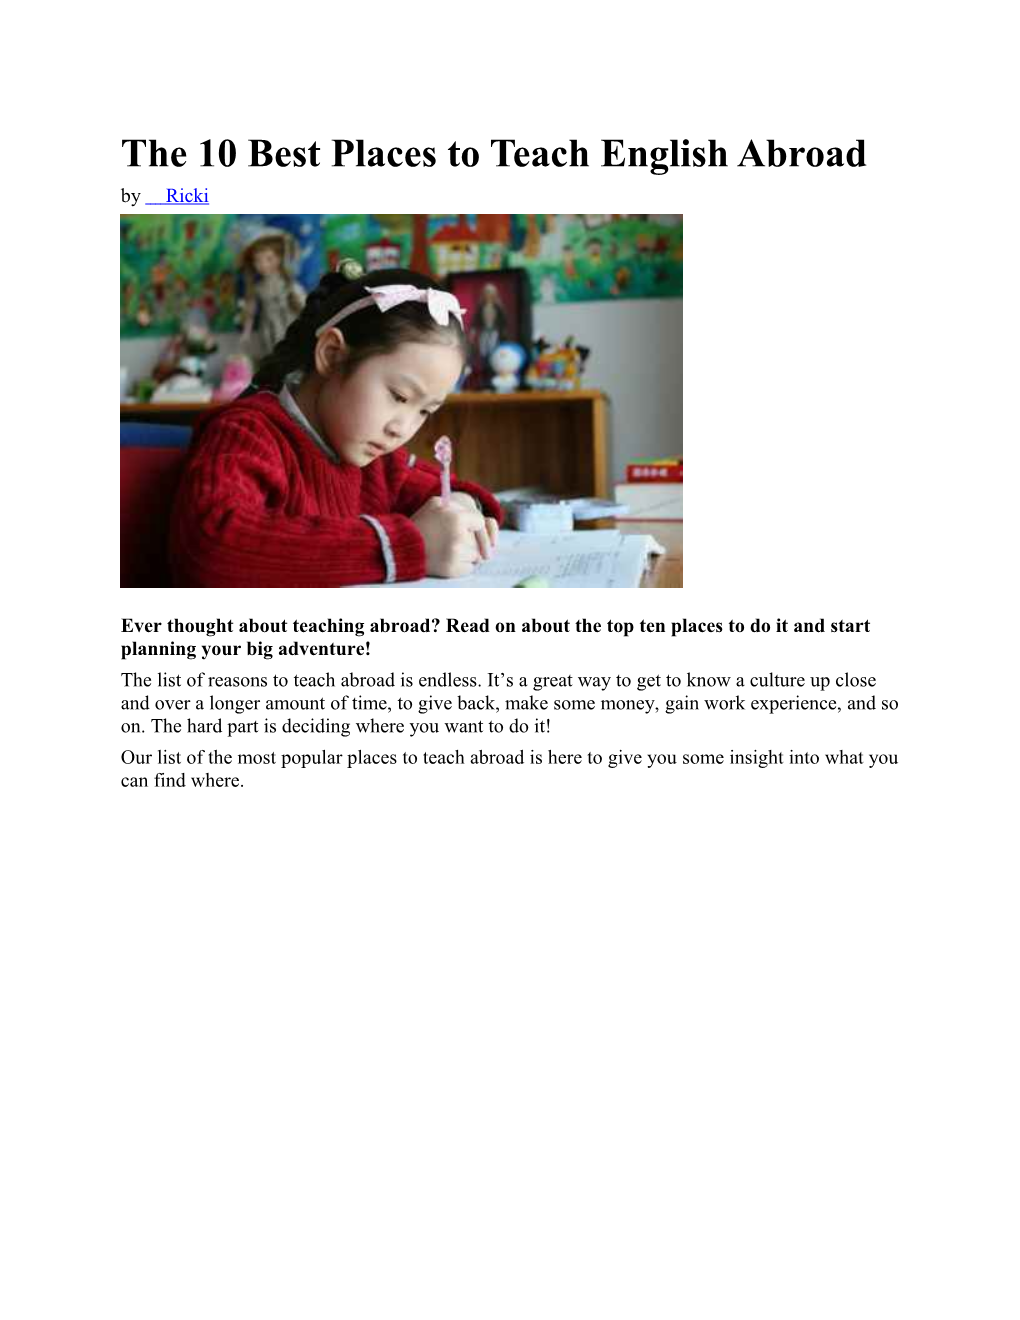 The 10 Best Places to Teach English Abroad